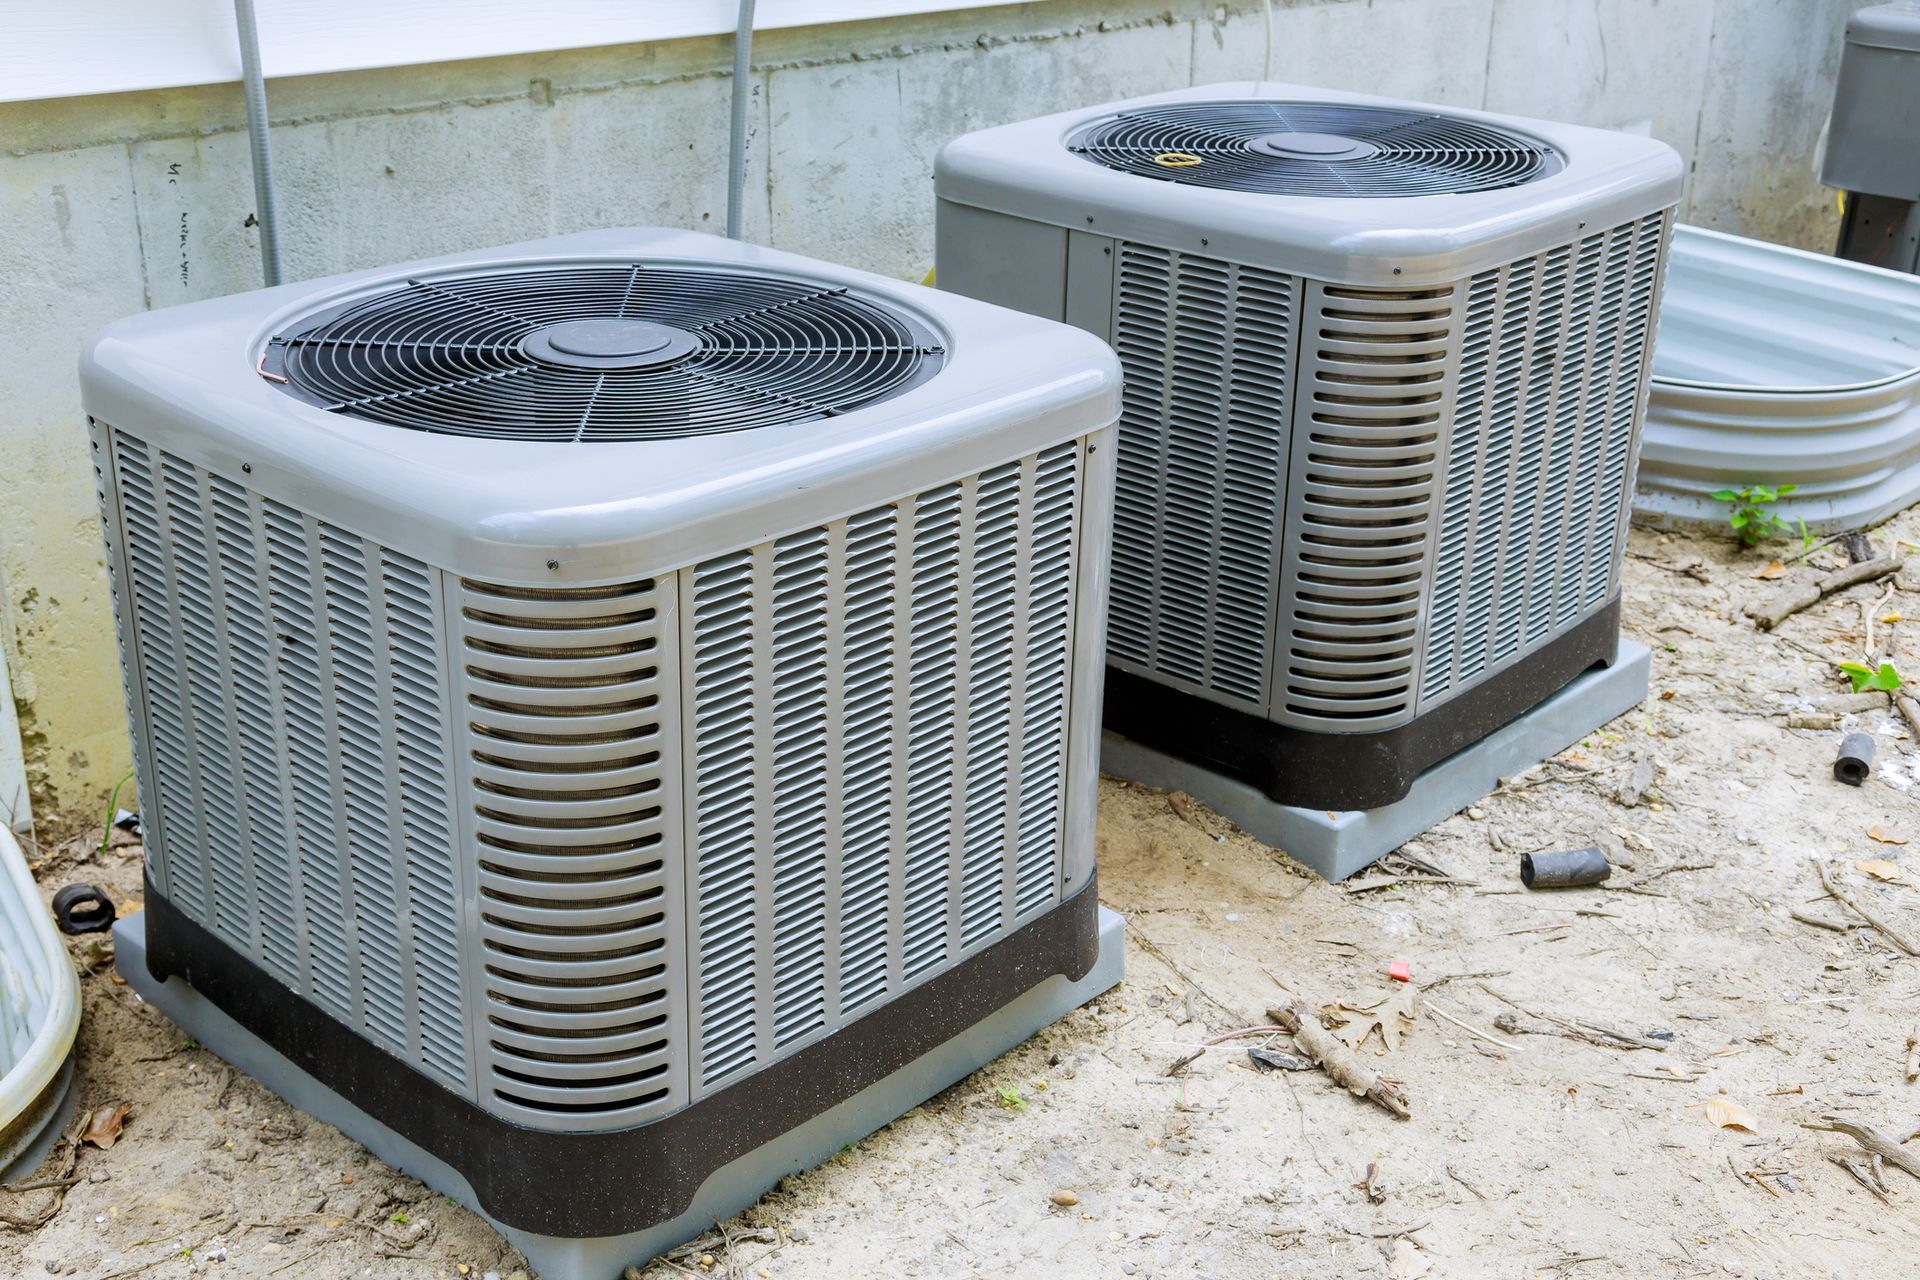 Two air conditioners are sitting on the ground next to each other.